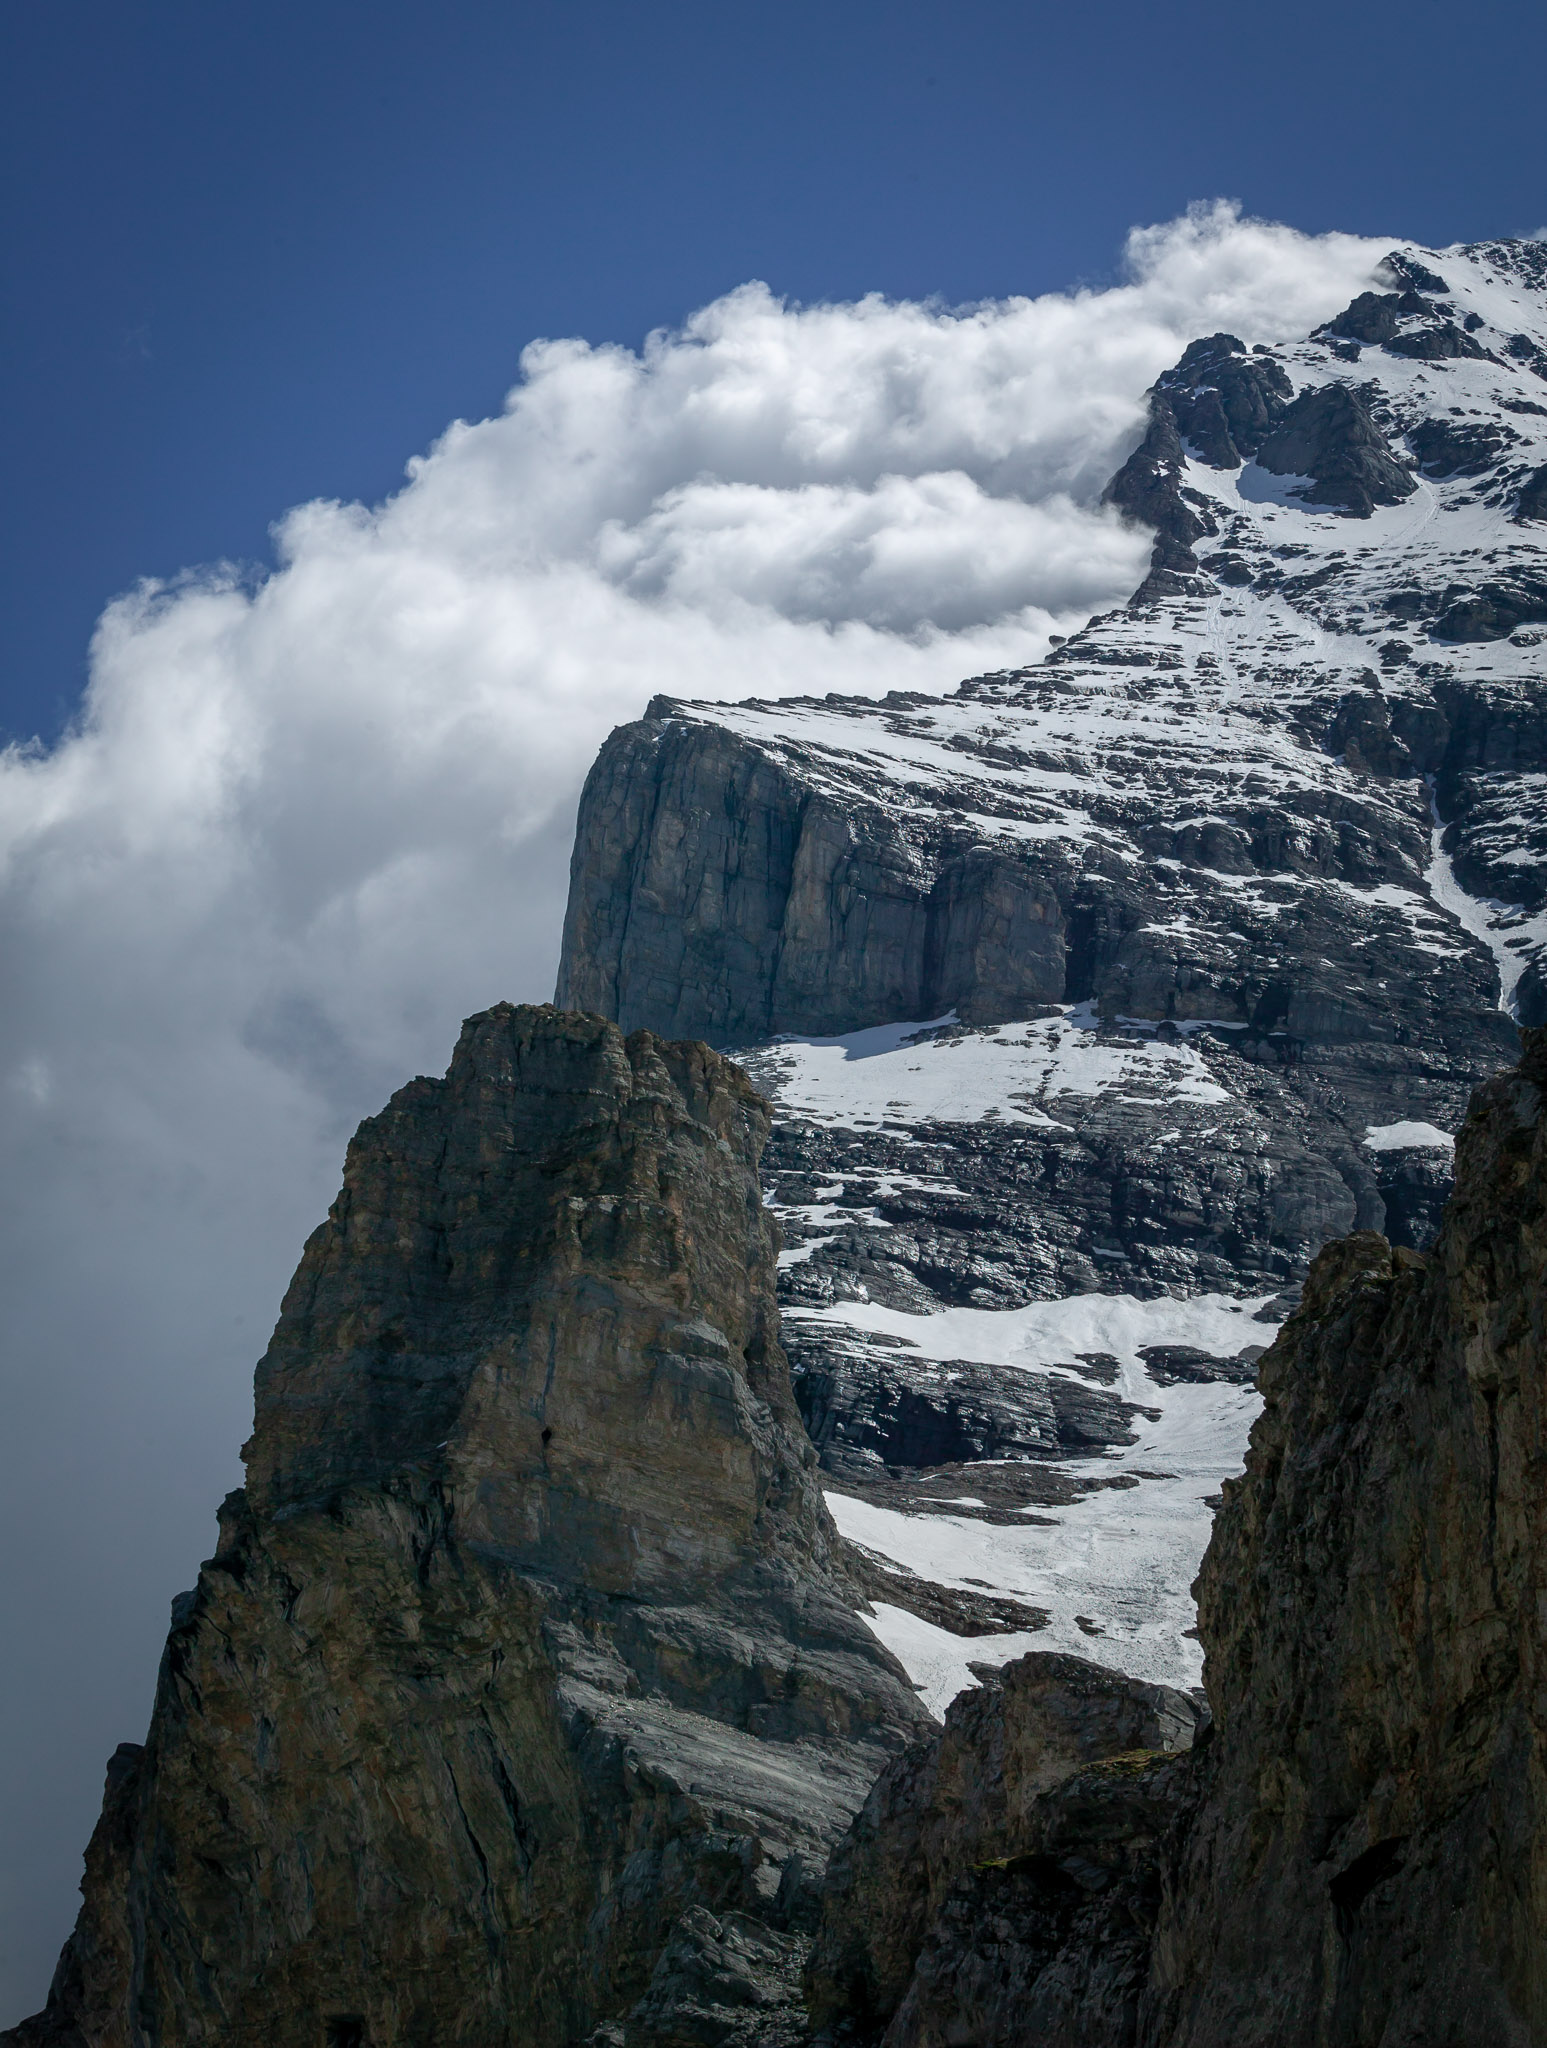 Clouds forming on face of the Eiger